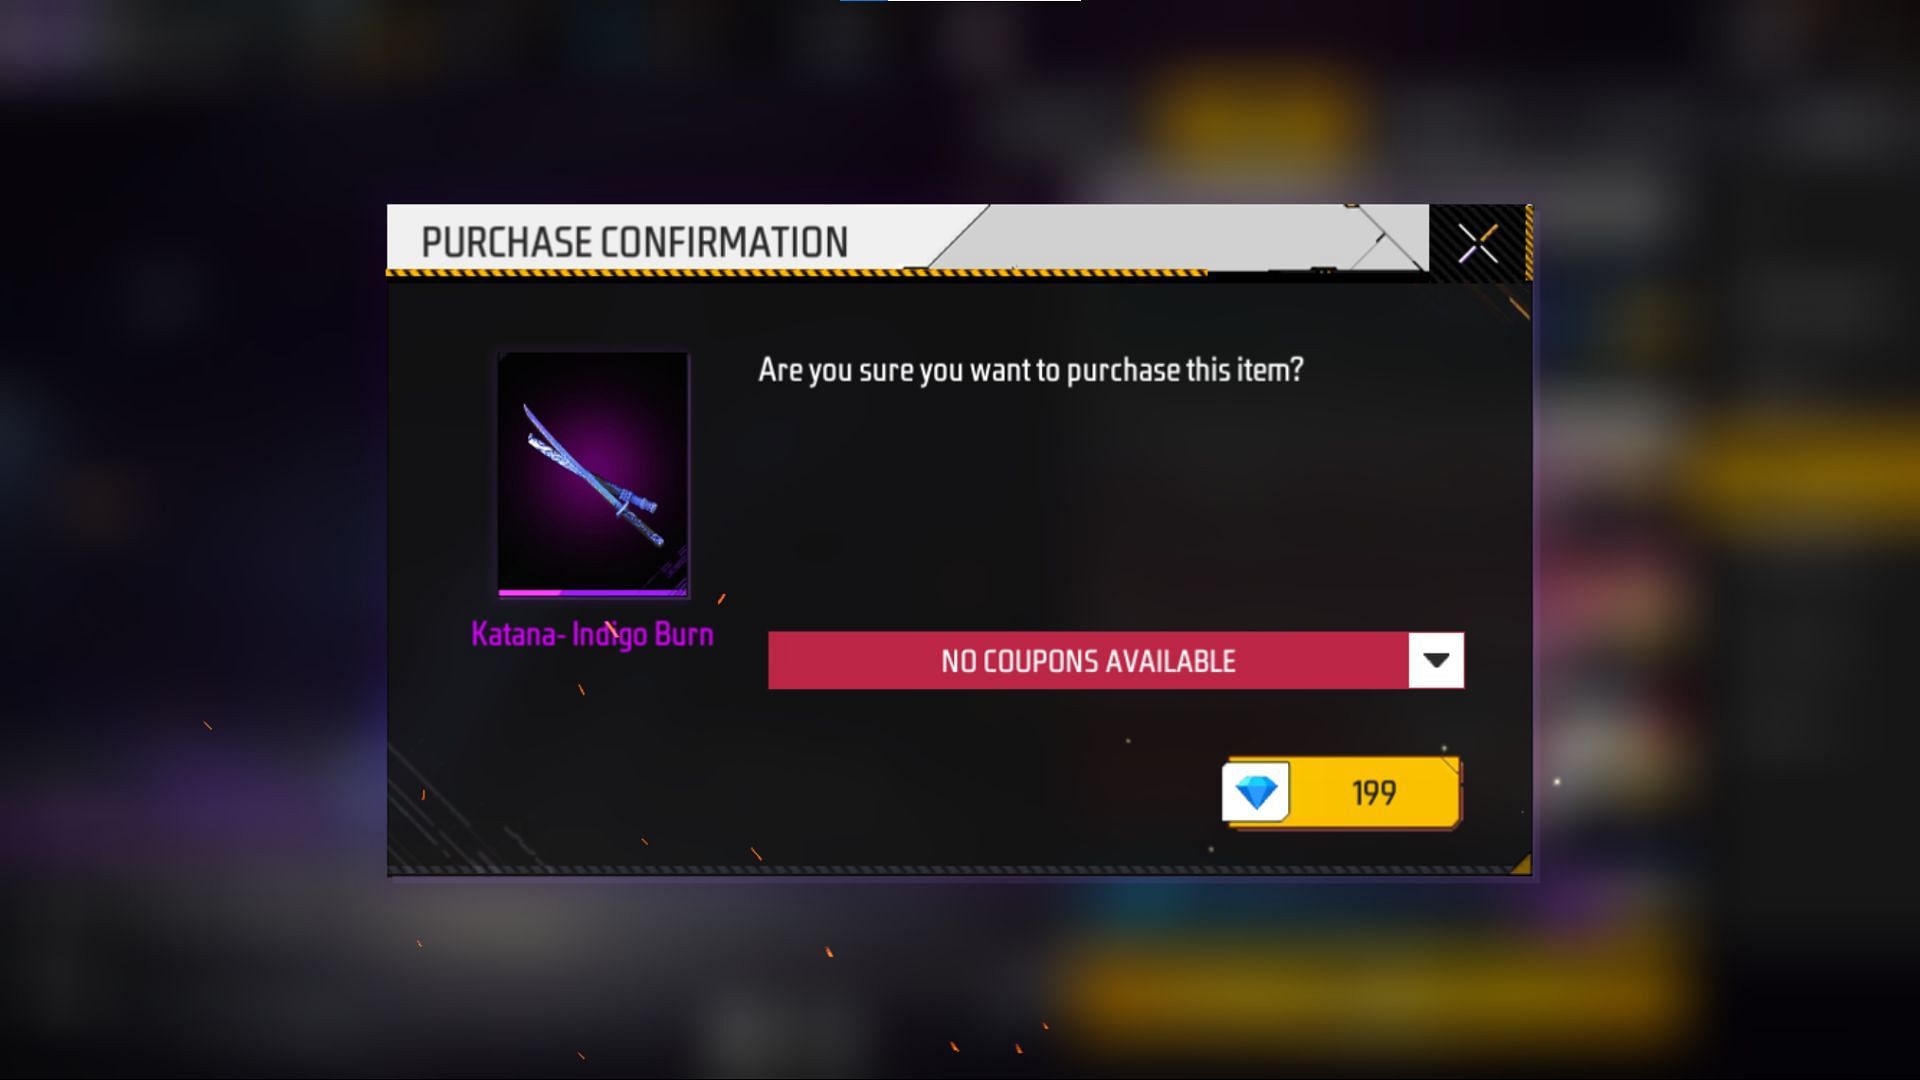 Players must confirm the purchase to get the weapon (Image via Garena)